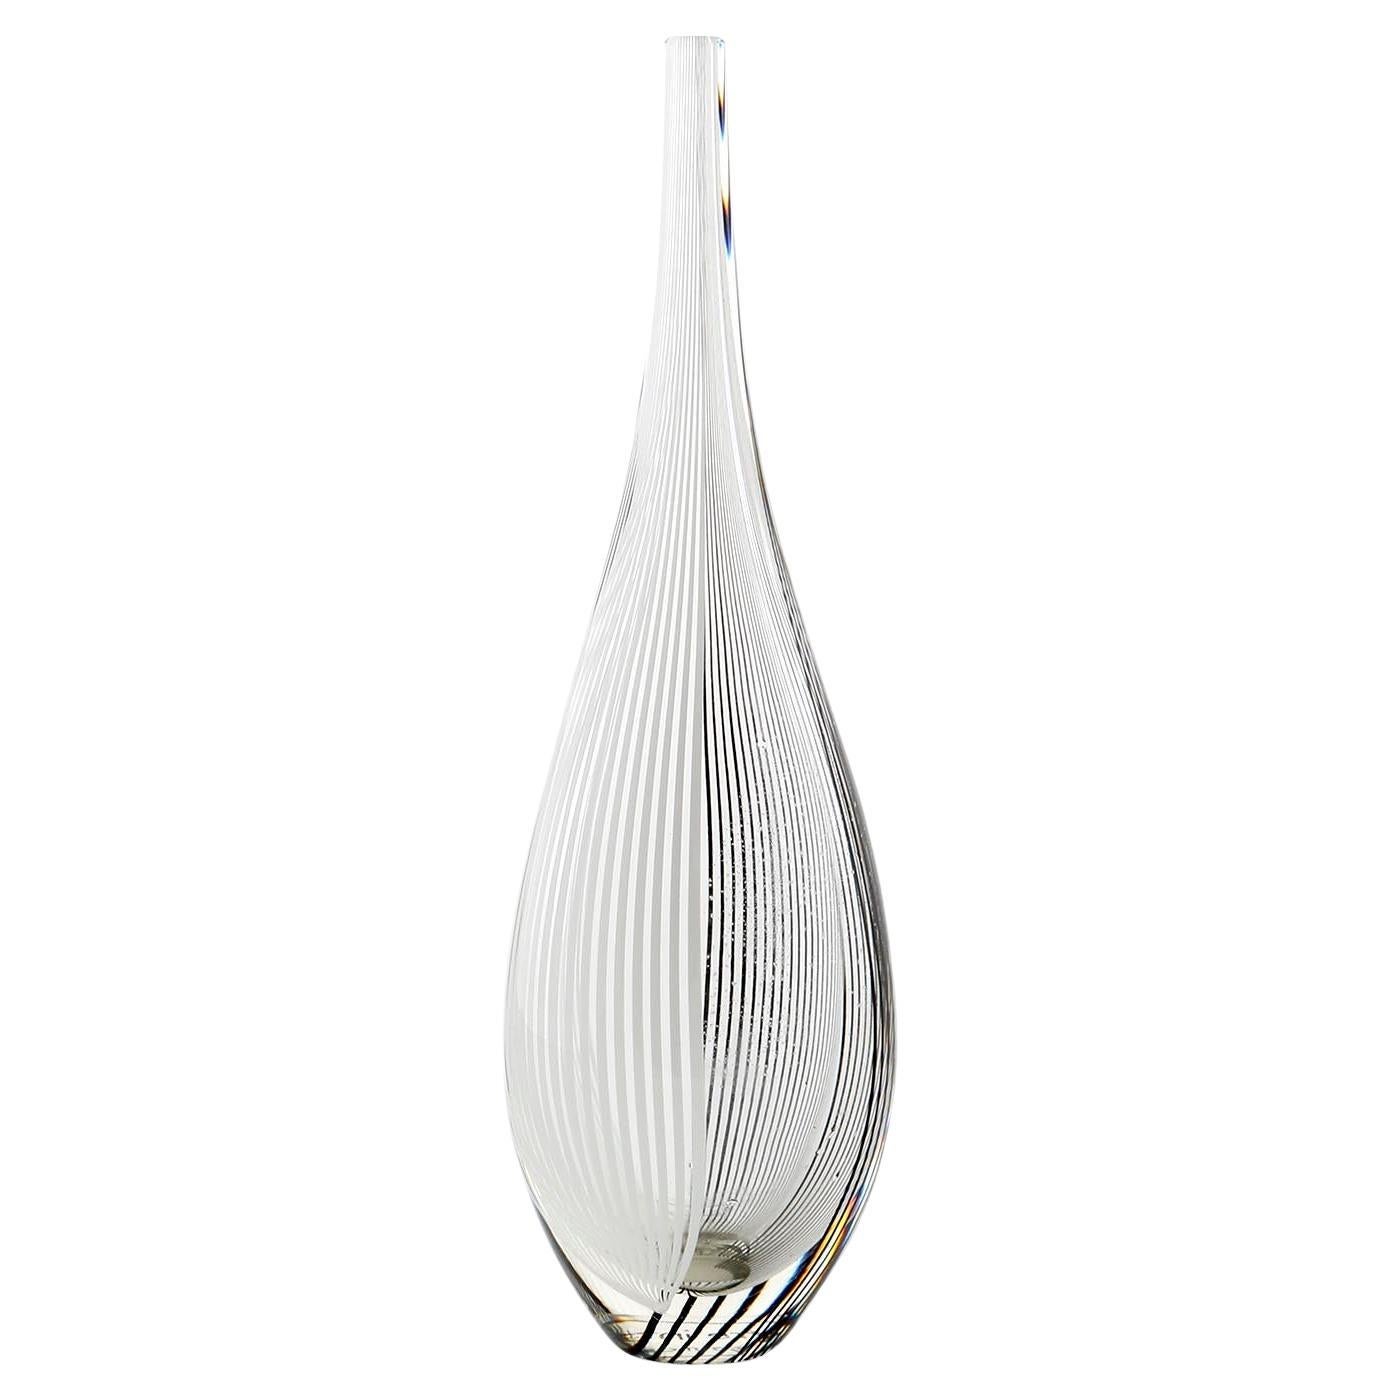 Vase Lino Tagliapietra for Effetre Italy, Black White Stripped Clear Glass, 1987 In Excellent Condition For Sale In Hausmannstätten, AT